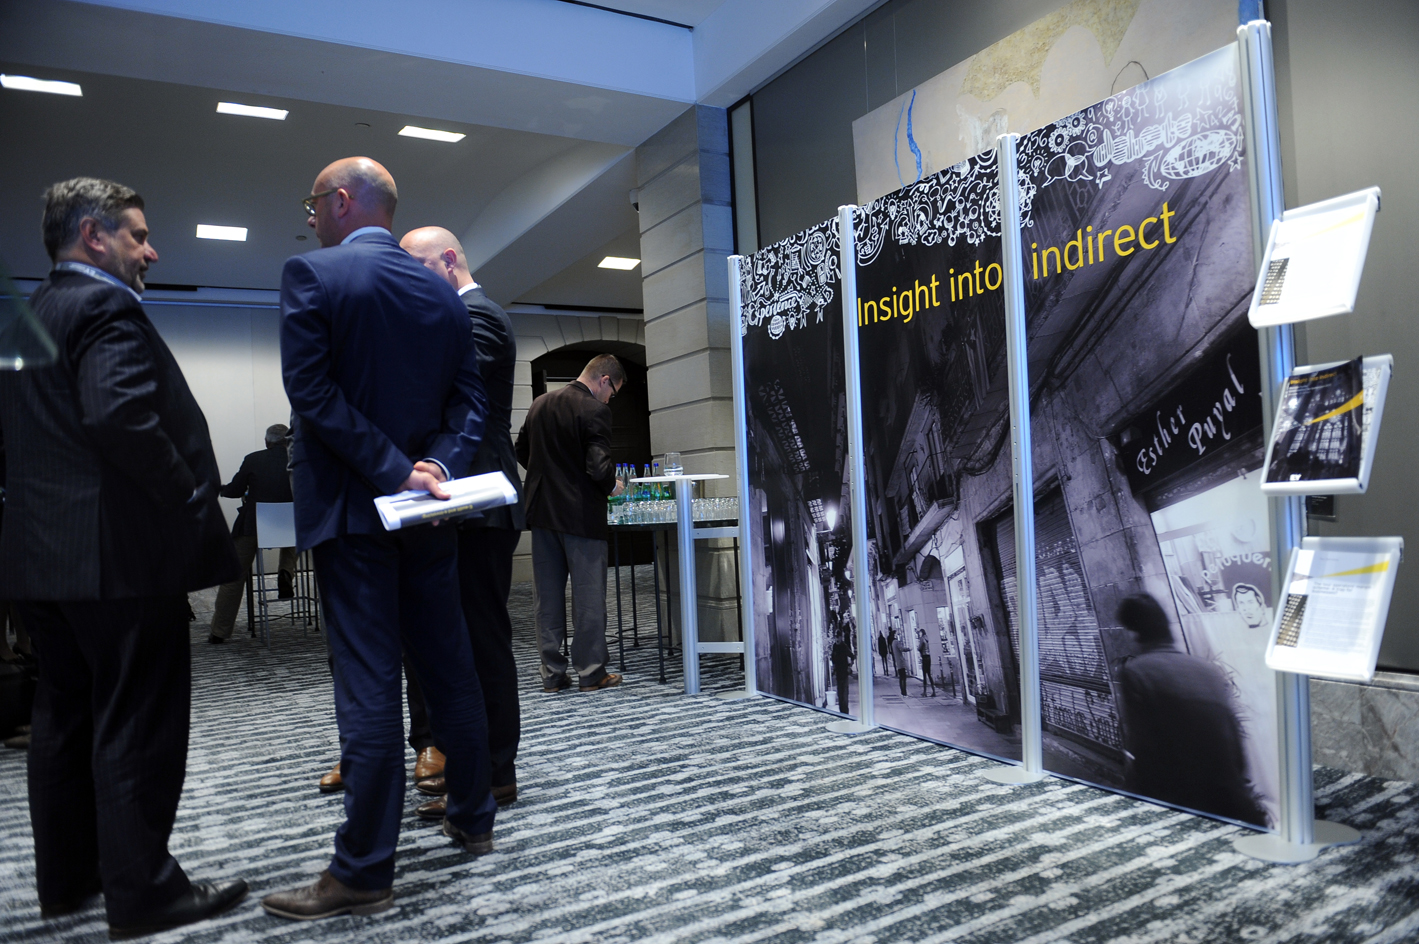 EY 'Insight into indirect' environmental graphics, Barcelona 2015